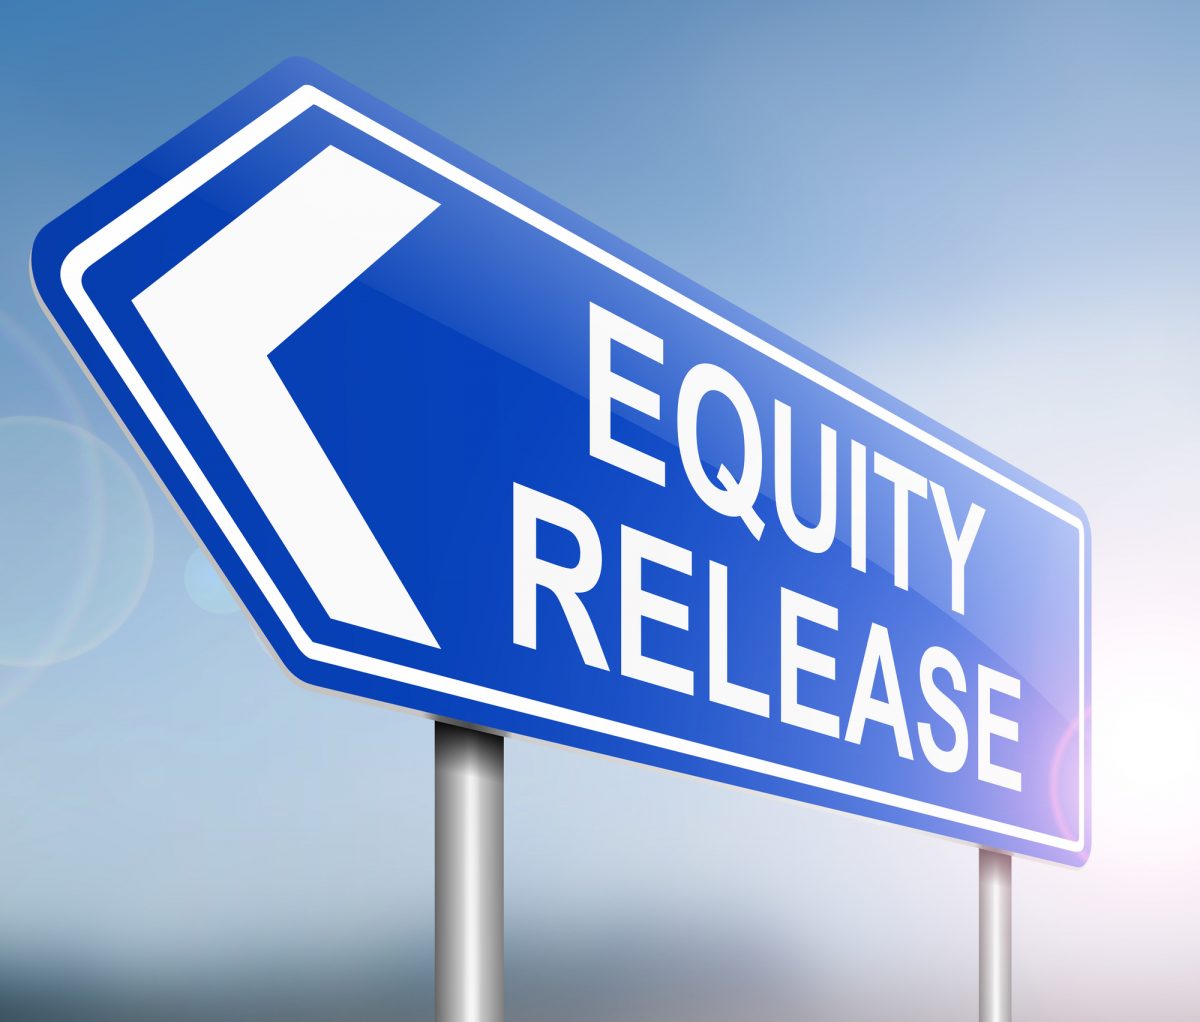 What is equity release?